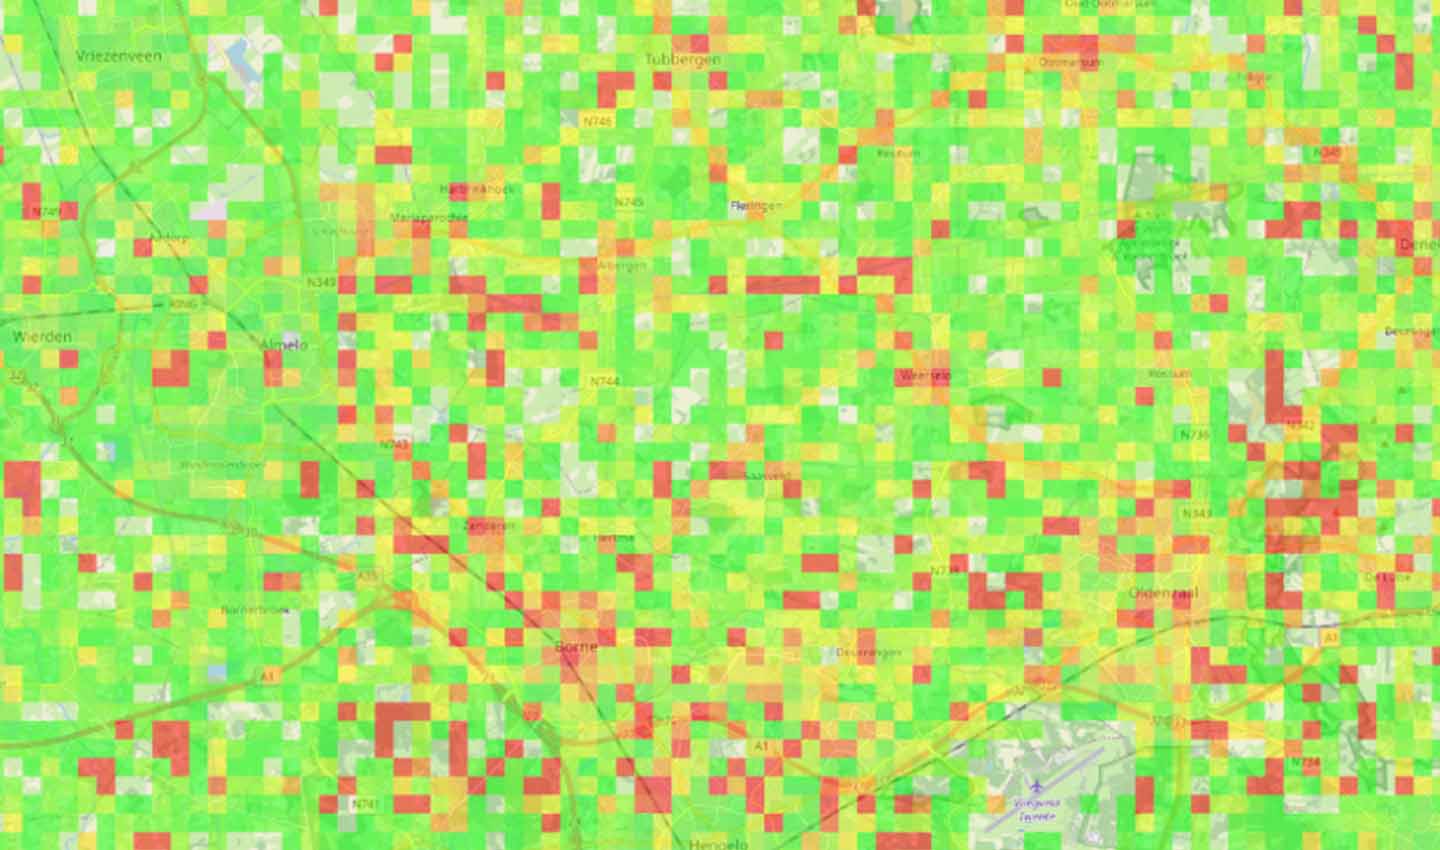 MapMetrics displays areas of good (green) and not-so-good (red) routing quality in OSM